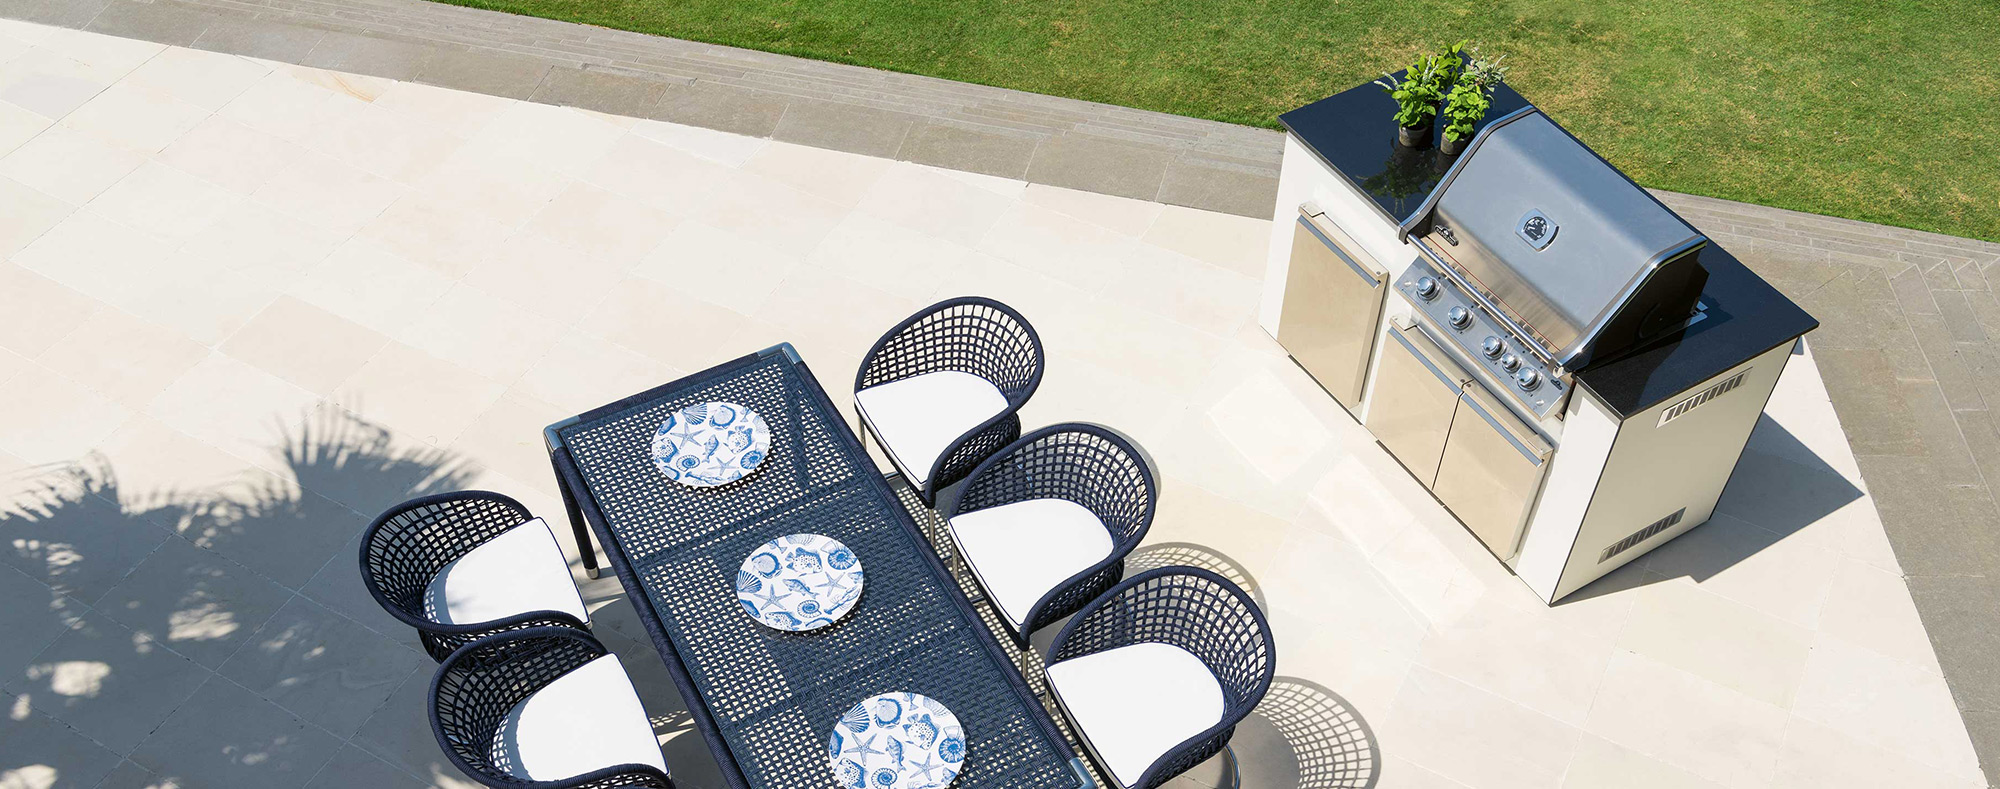 Outdoor dining tables and grill